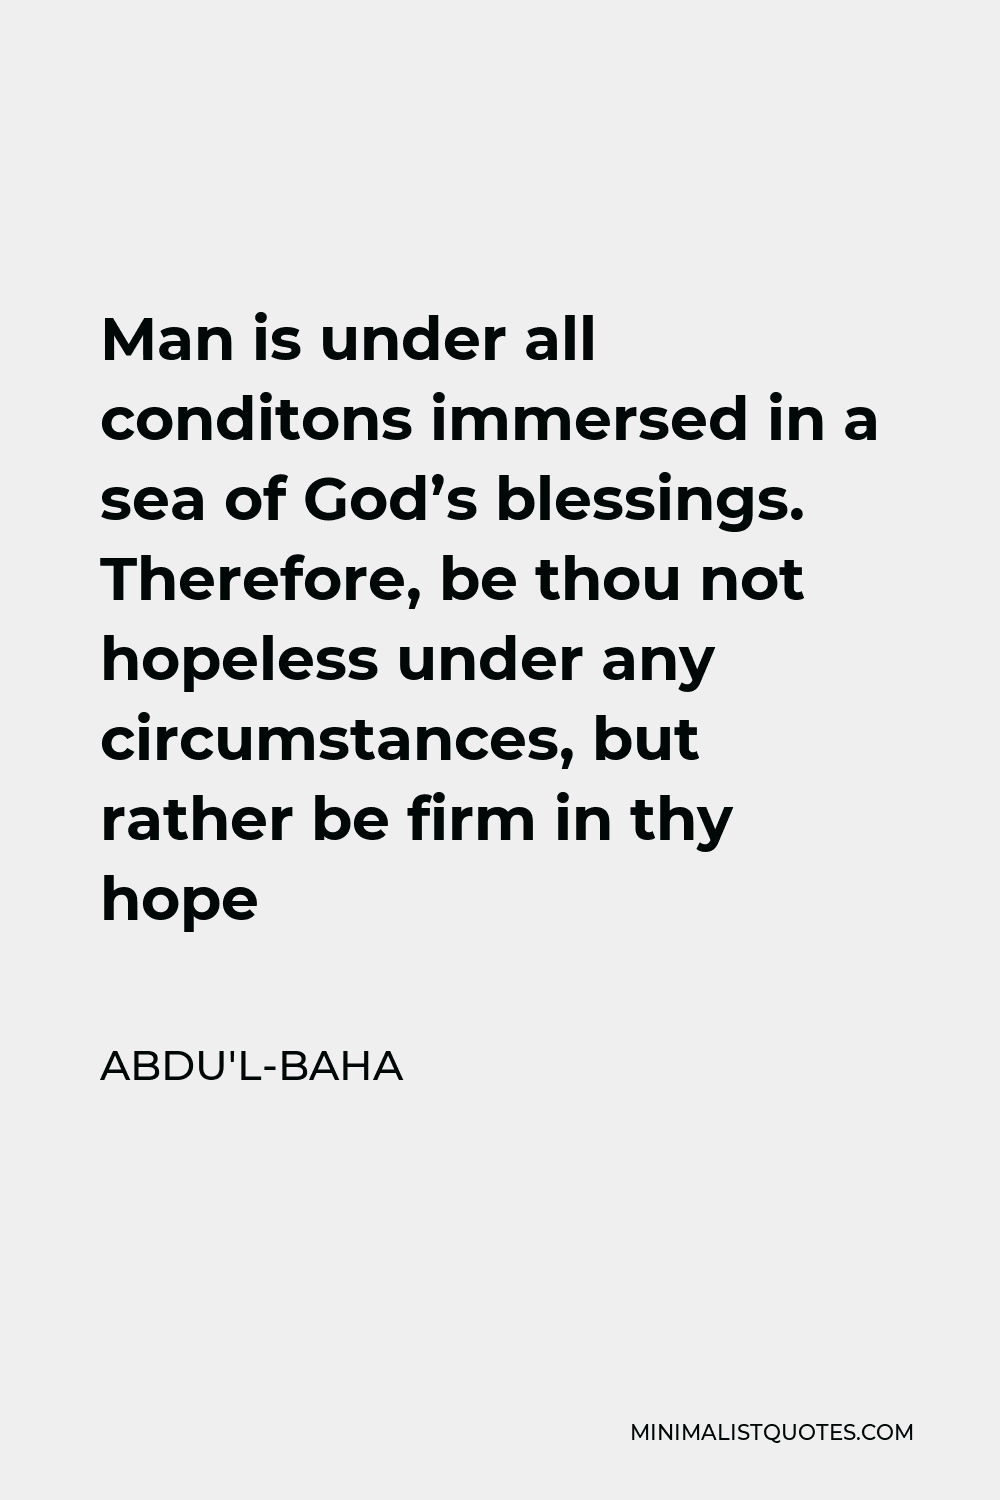 Abdu'l-Baha Quote - Man is under all conditons immersed in a sea of God’s blessings. Therefore, be thou not hopeless under any circumstances, but rather be firm in thy hope